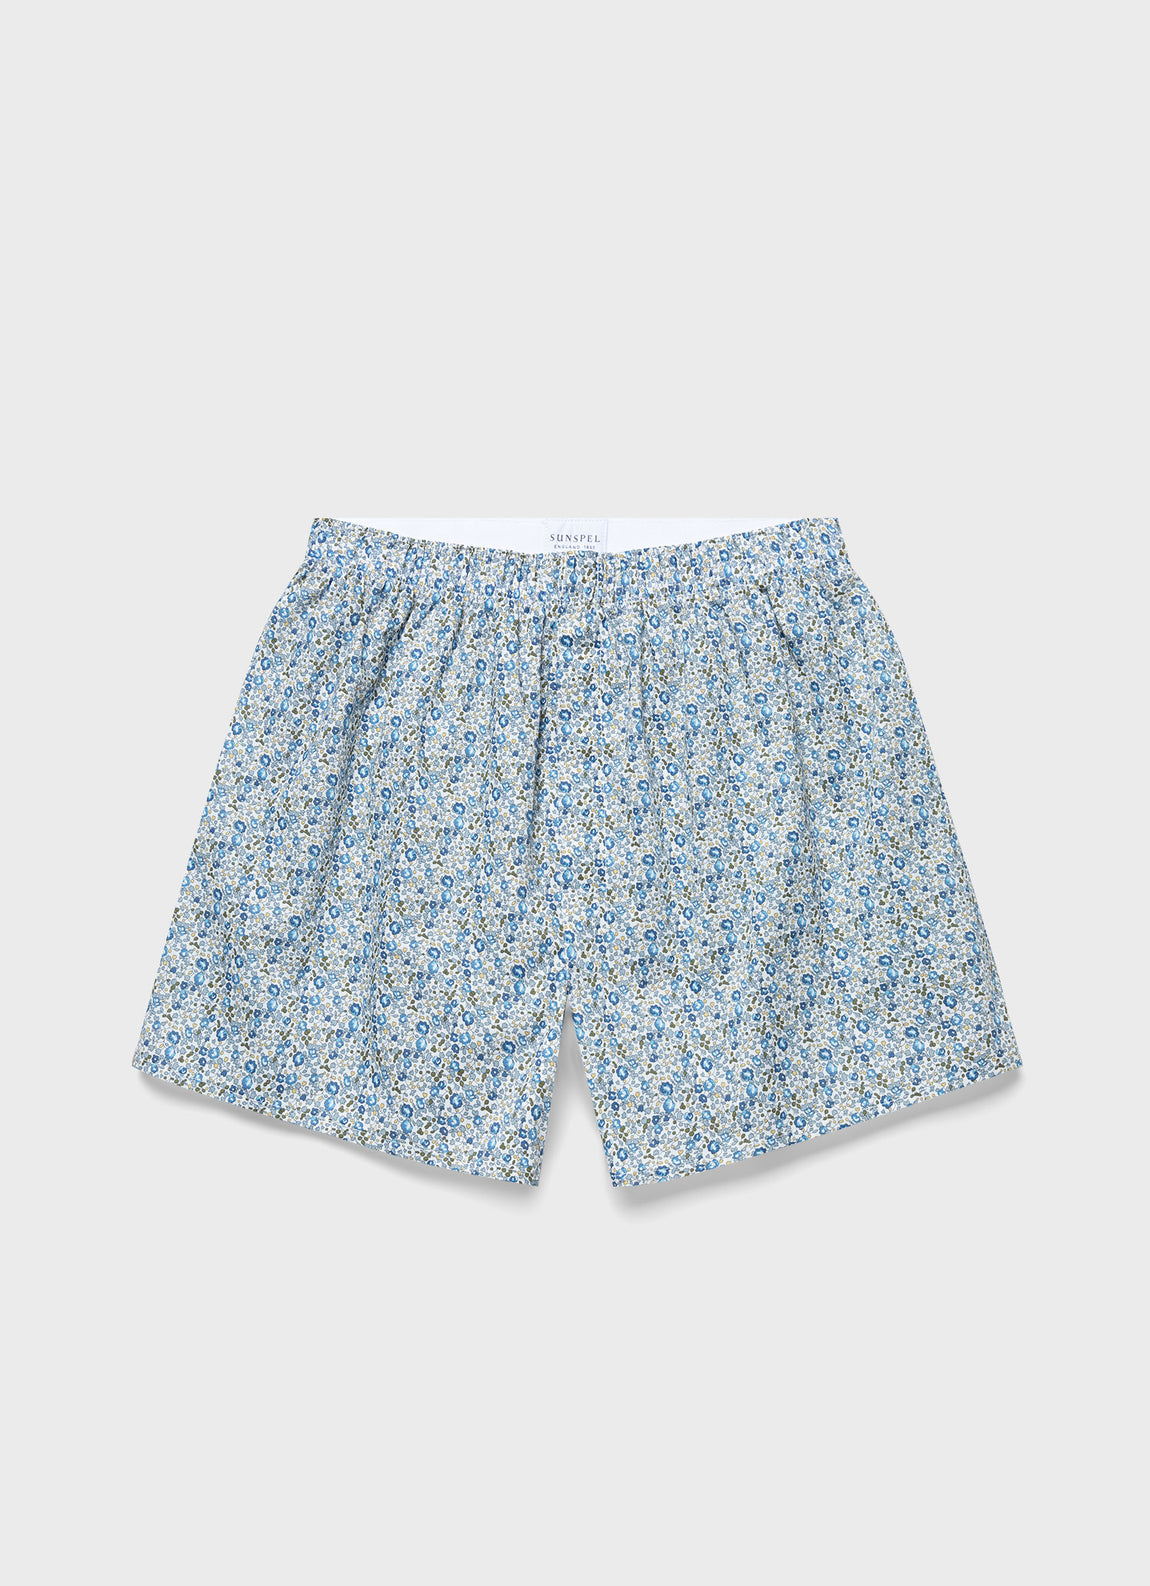 Men's Classic Boxer Shorts in Liberty Fabric in Blue Floral Ditsy